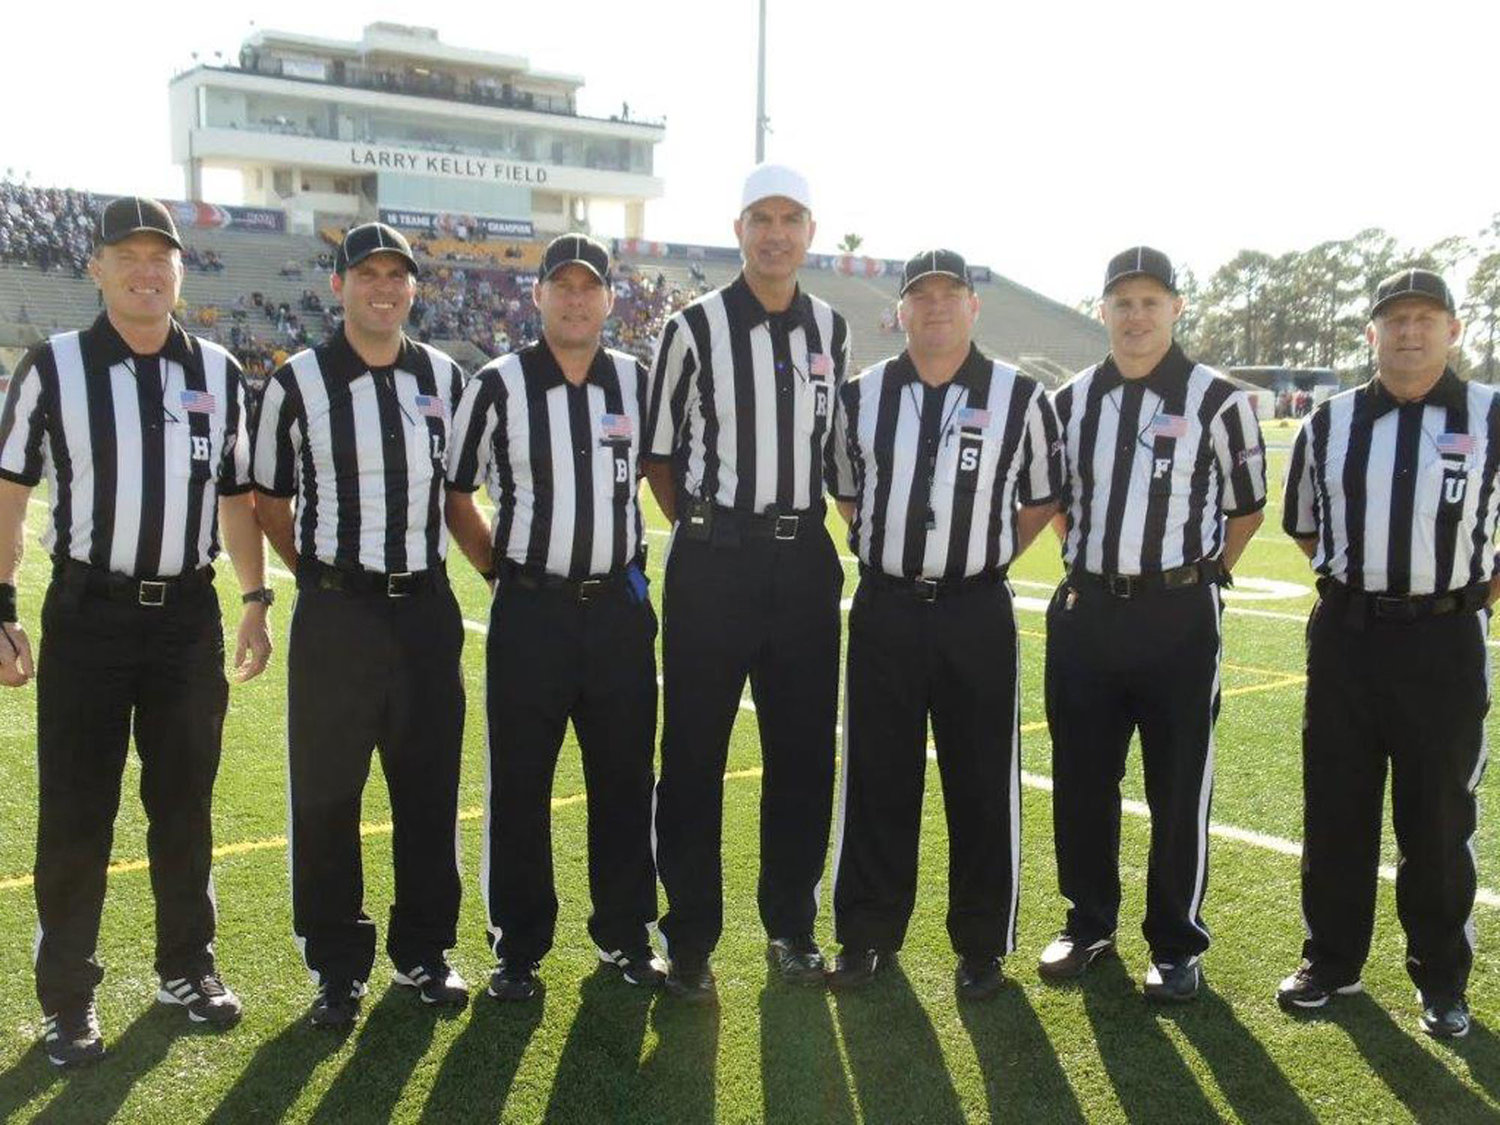 Blair resident part of national championship game officiating crew